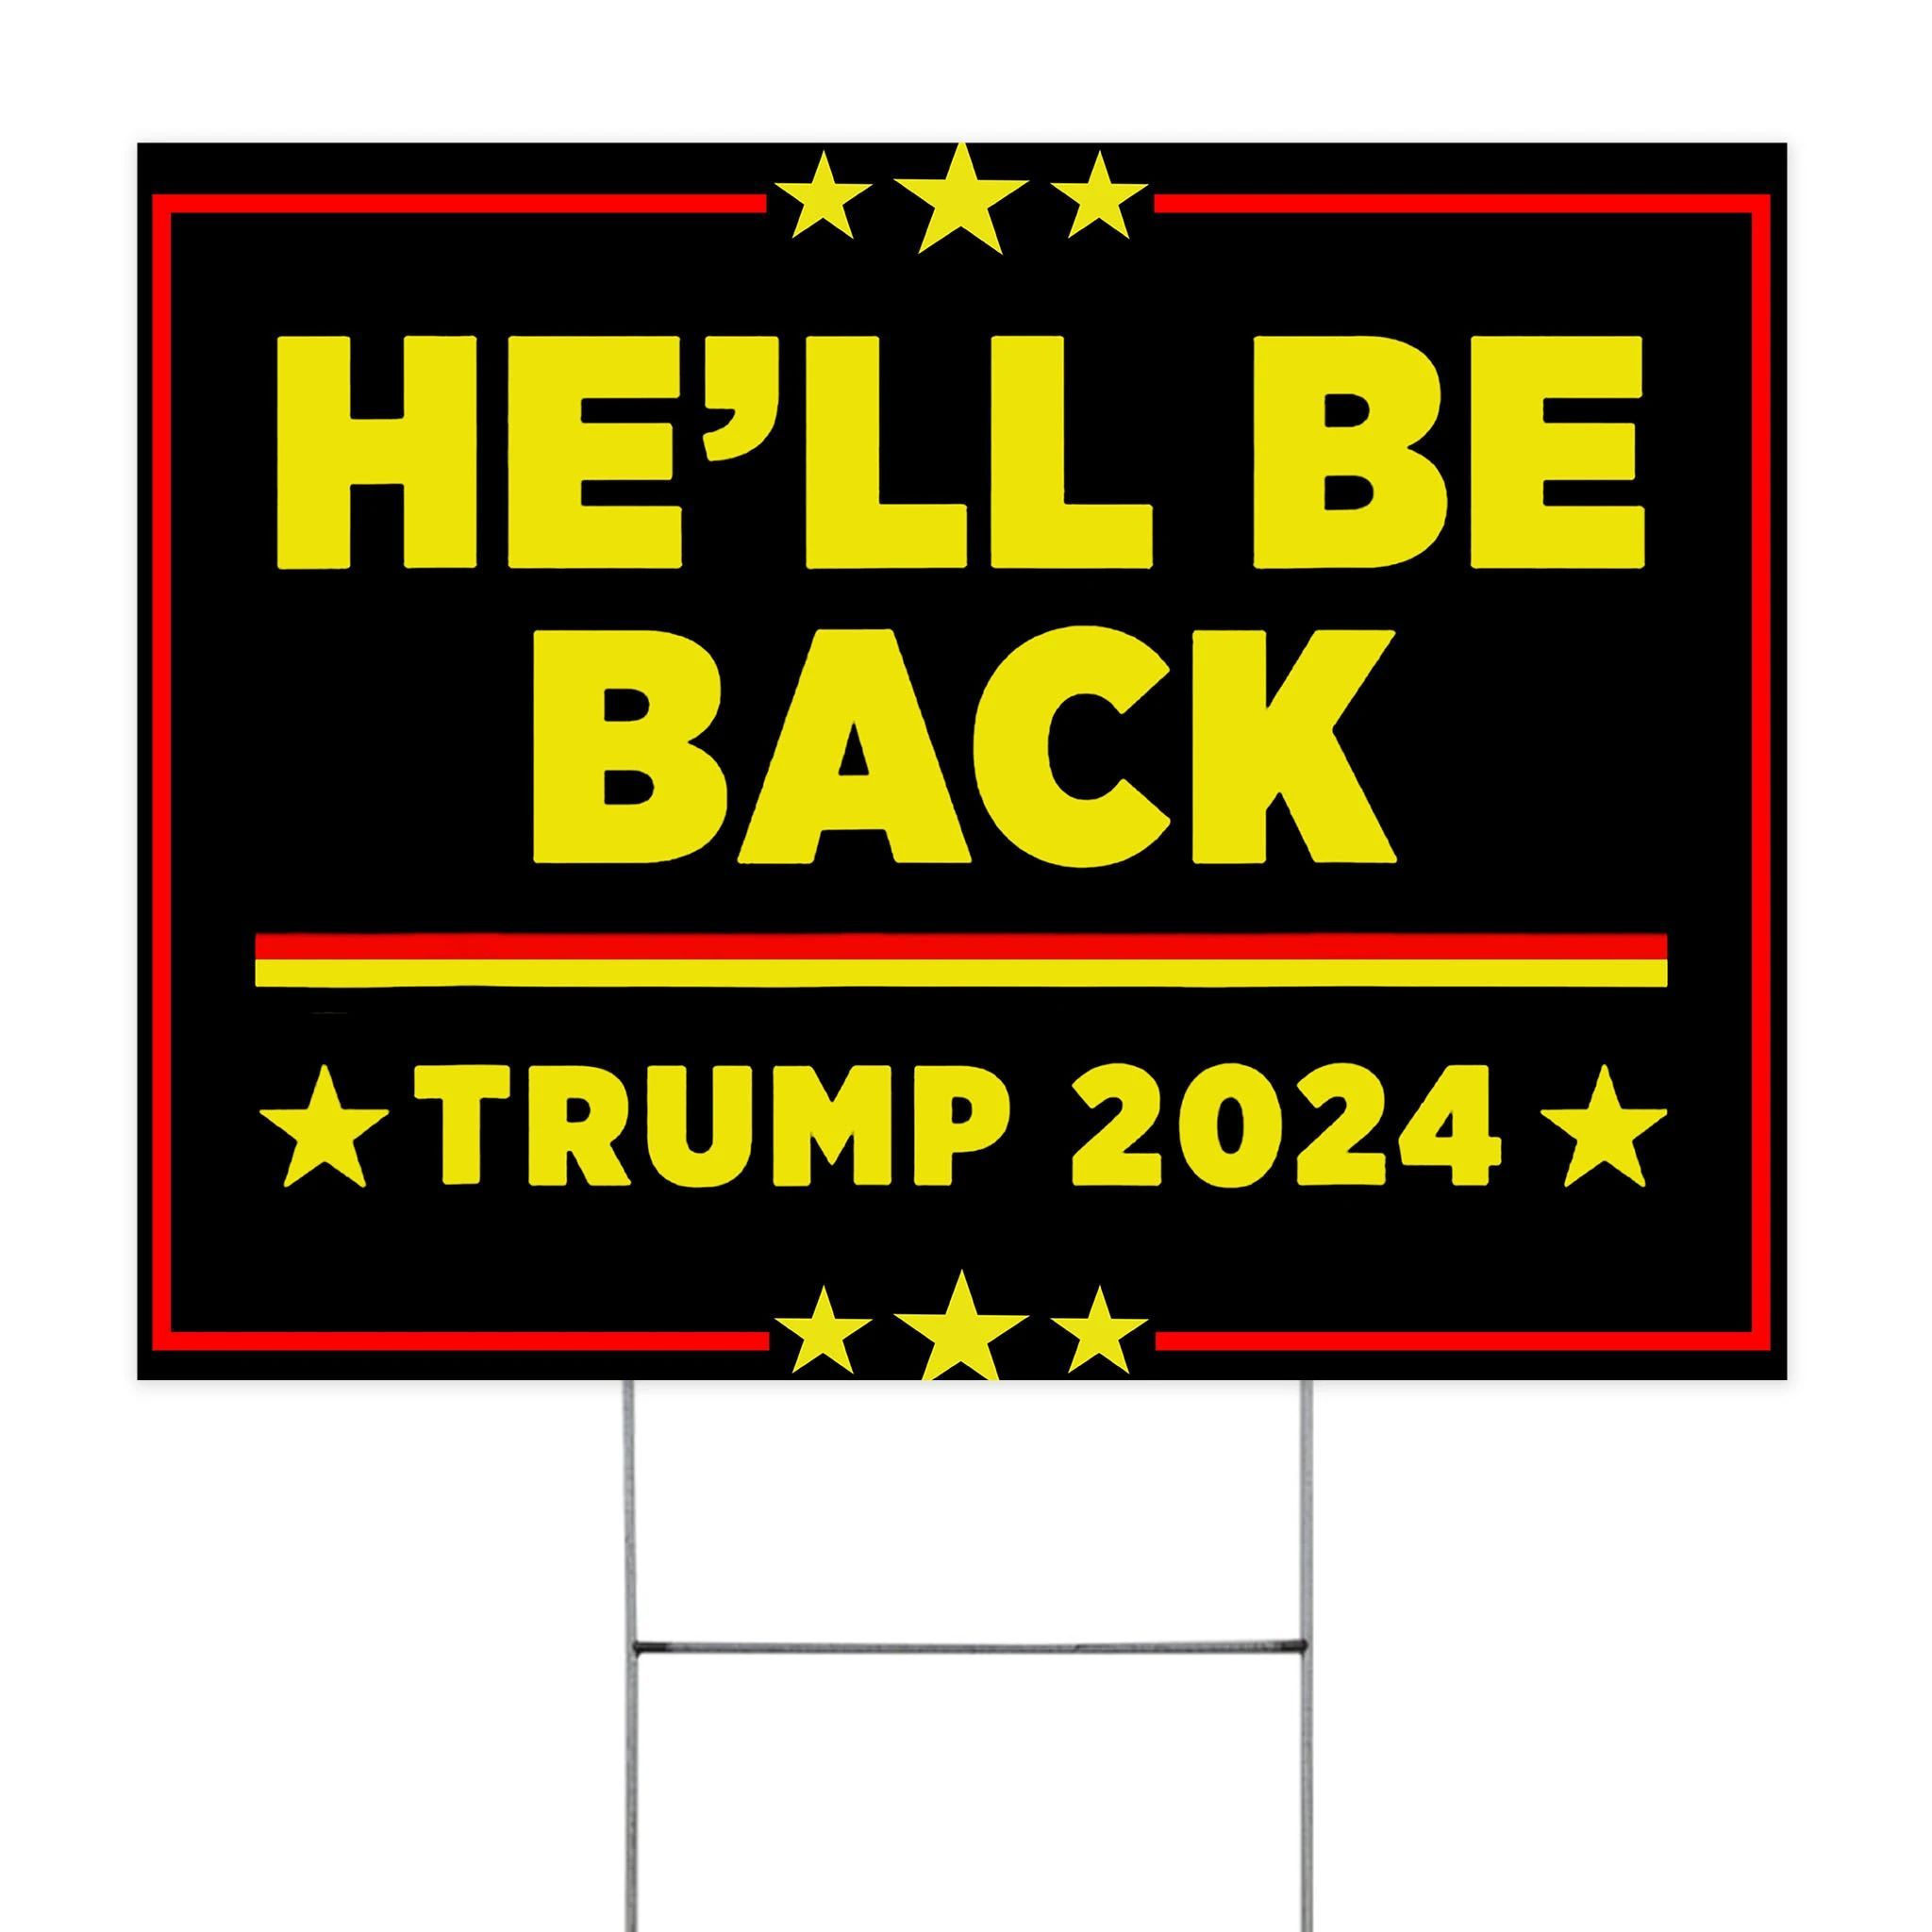 Trump 2024 Yard Sign He'll Be Back Support Trump Merchandise Outdoor Decor